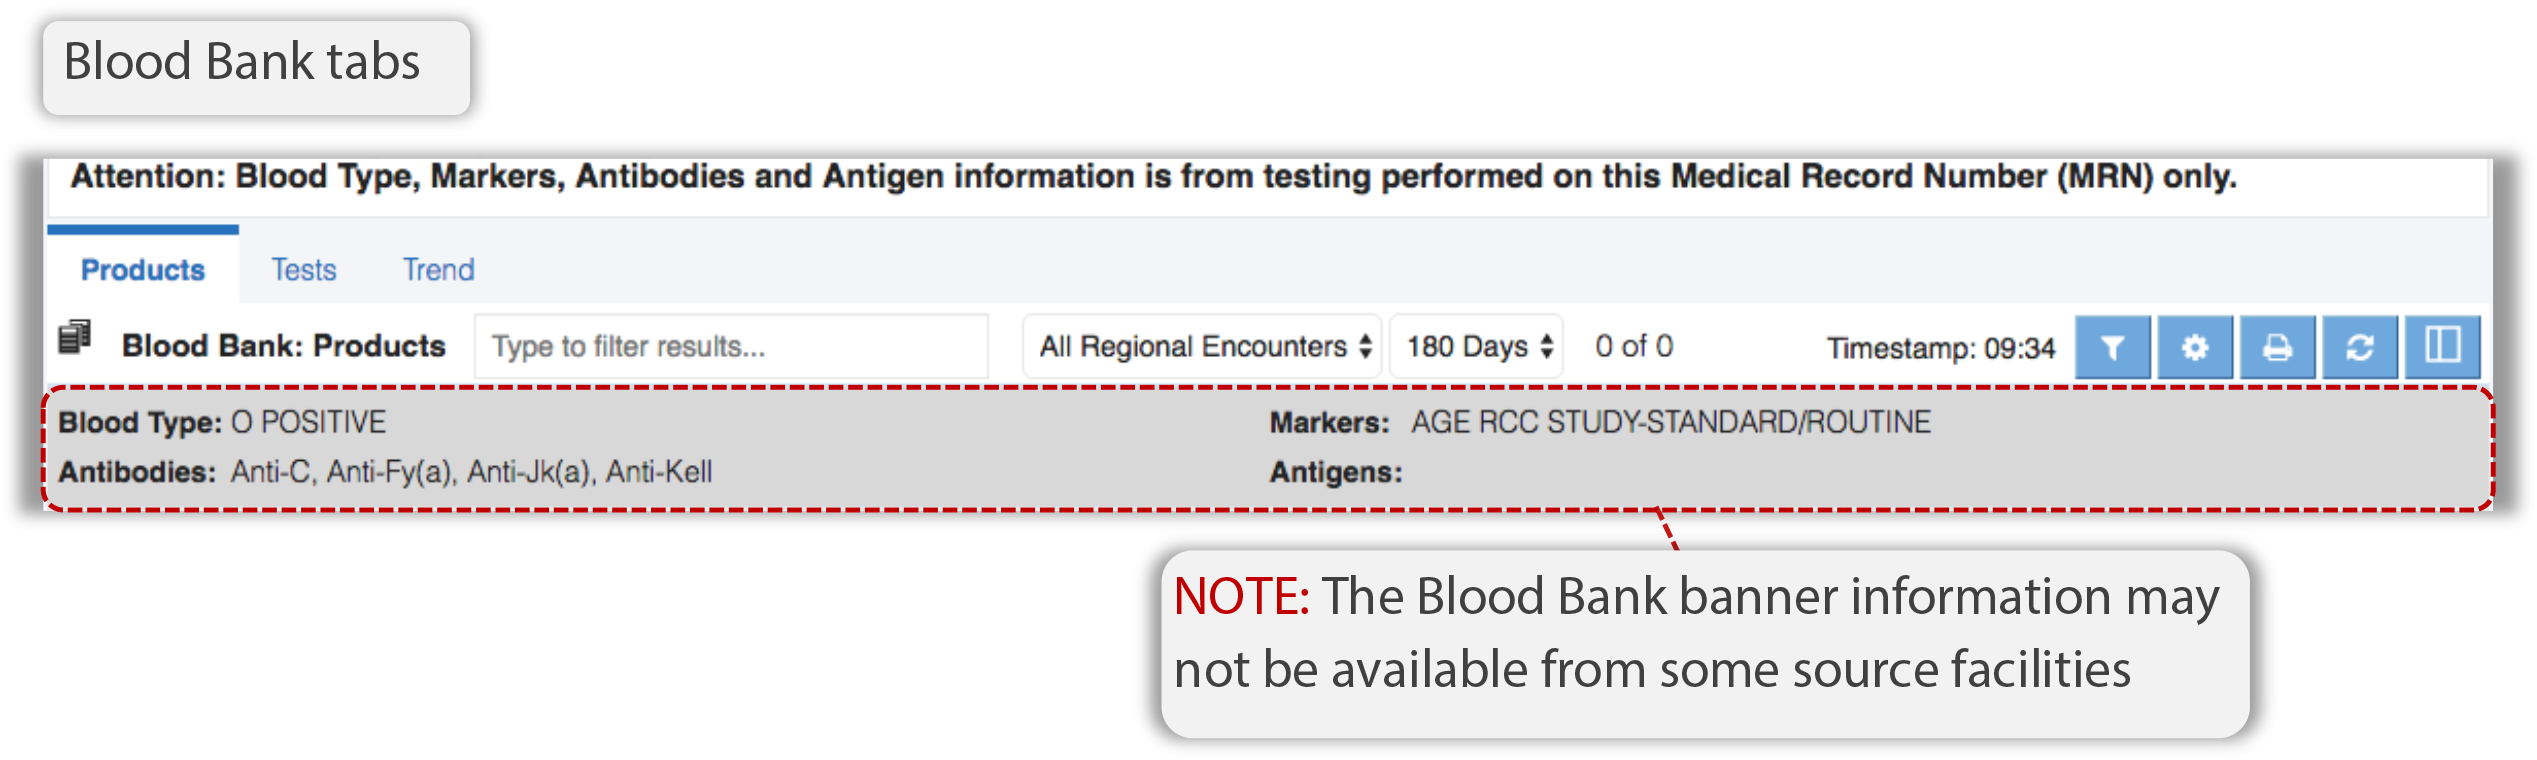 Image highlighting various features of blood bank module